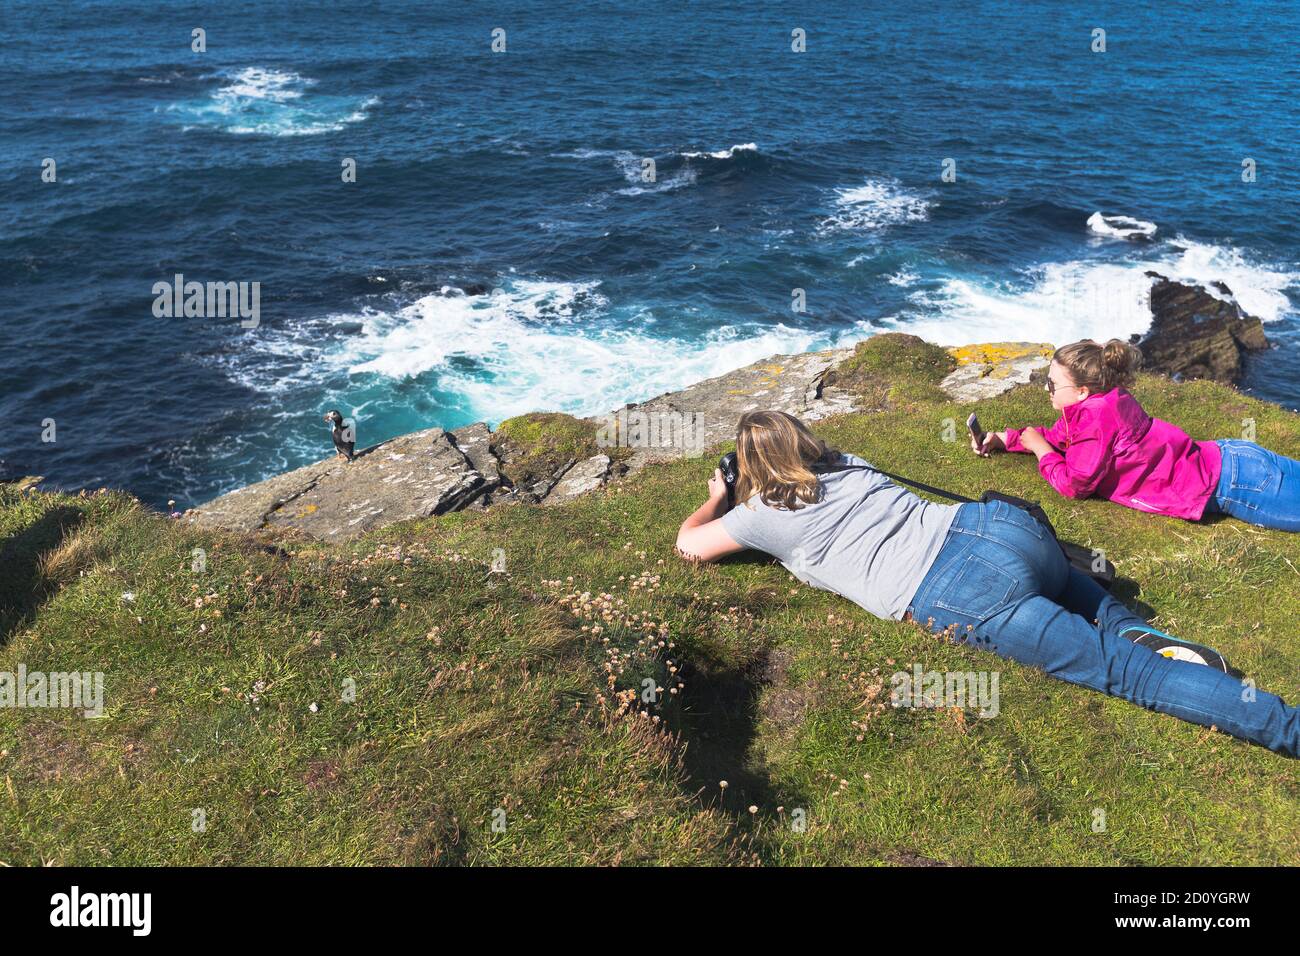 dh Brough of Birsay ORKNEY SCOTLAND Puffin on cliff top family tourists photographing puffins two people watching fratercula arctica Stock Photo